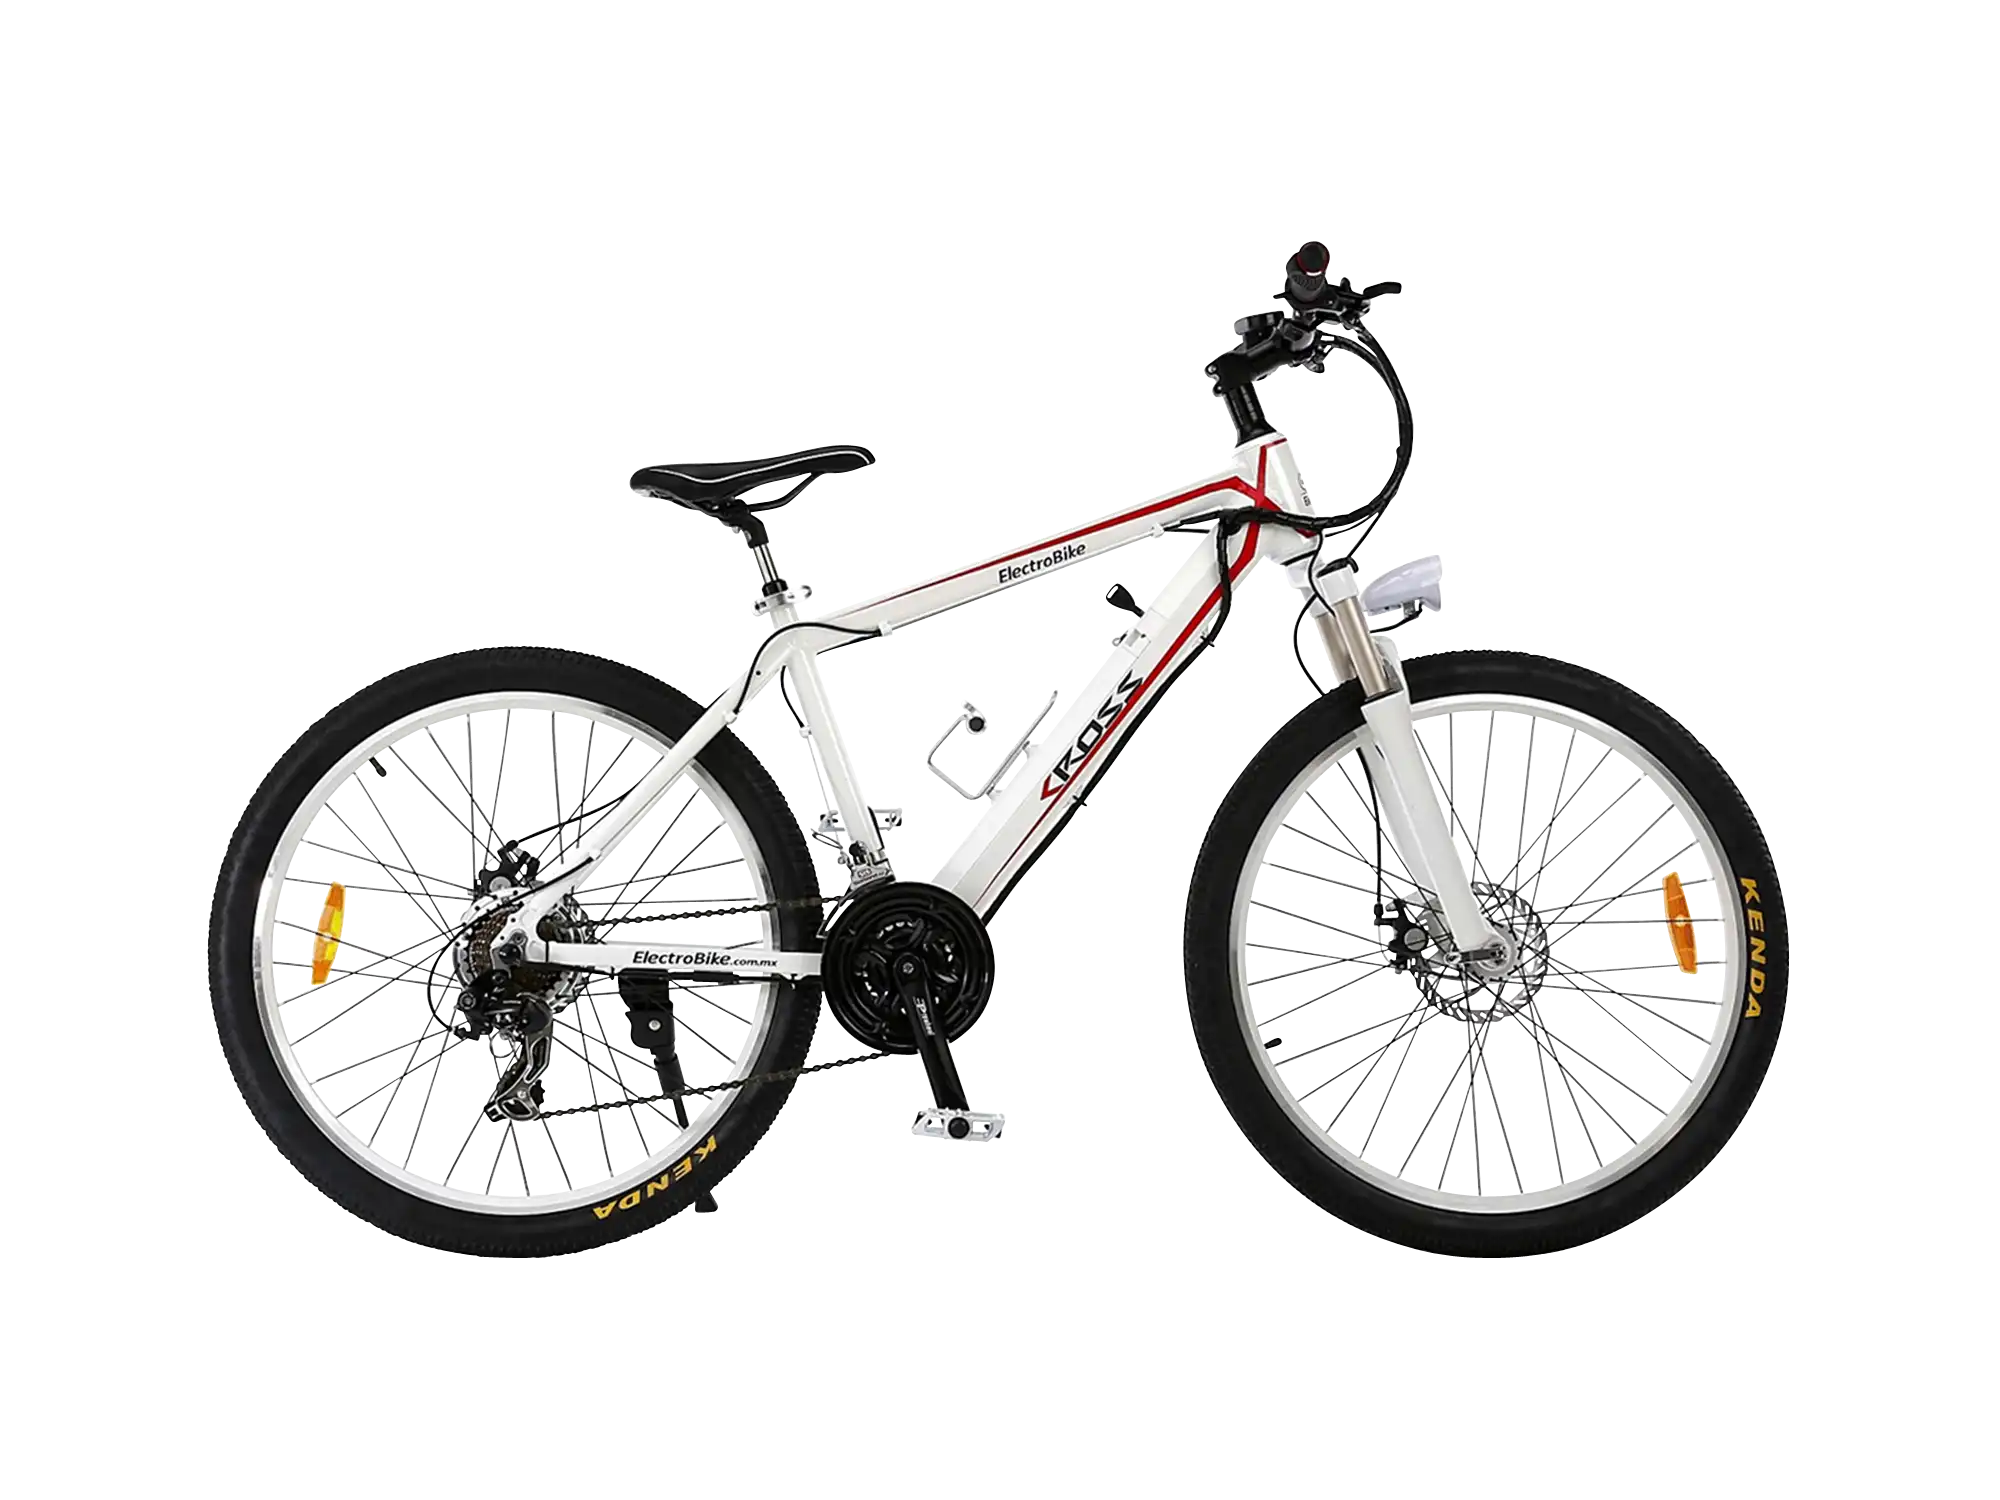 2016 ElectroBike Cross Review